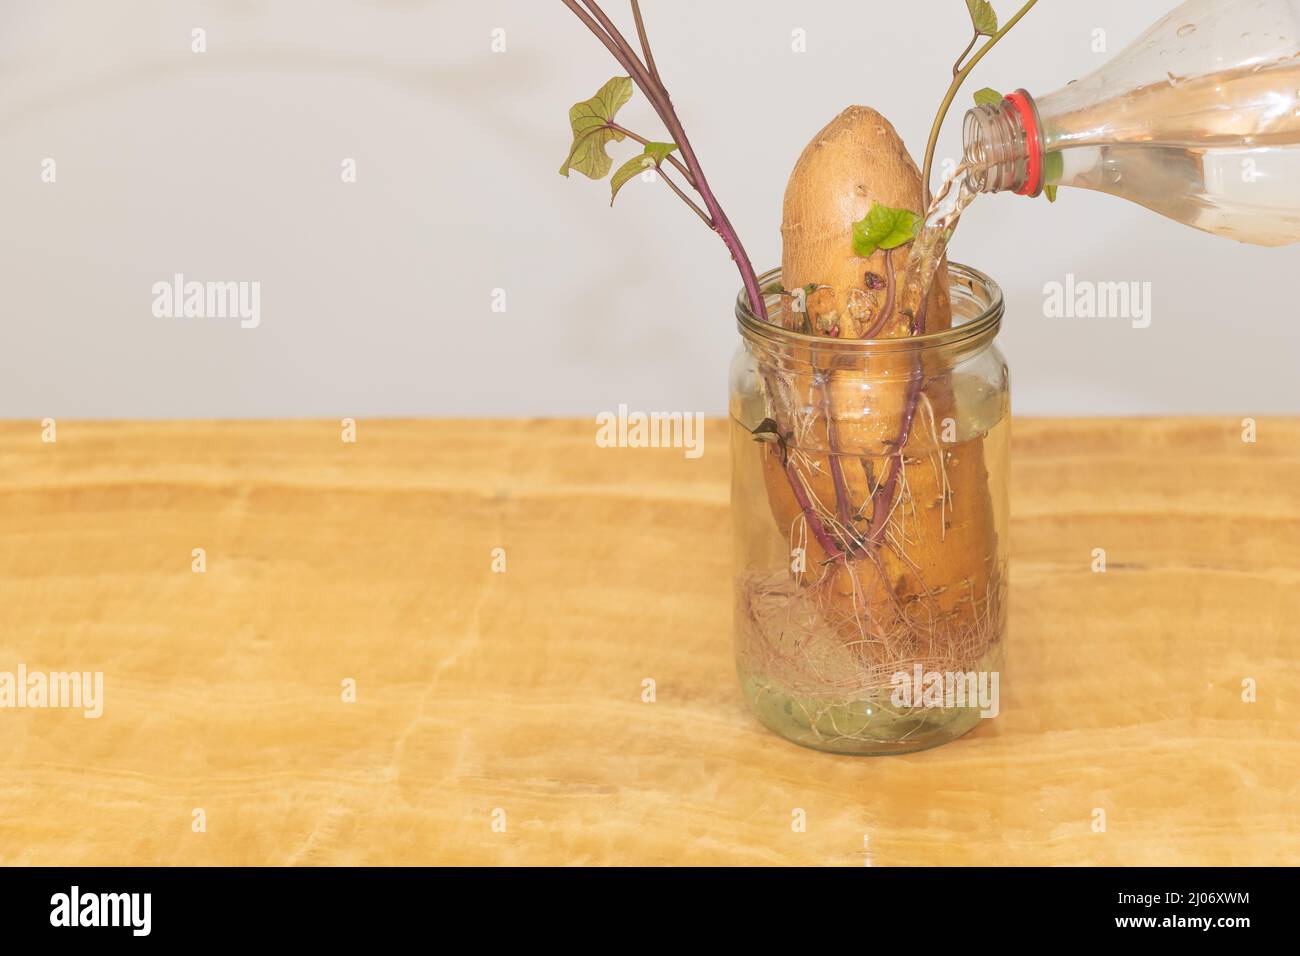 Watering a plant called the Sweet potato that grows in the house as a decorative plant Stock Photo